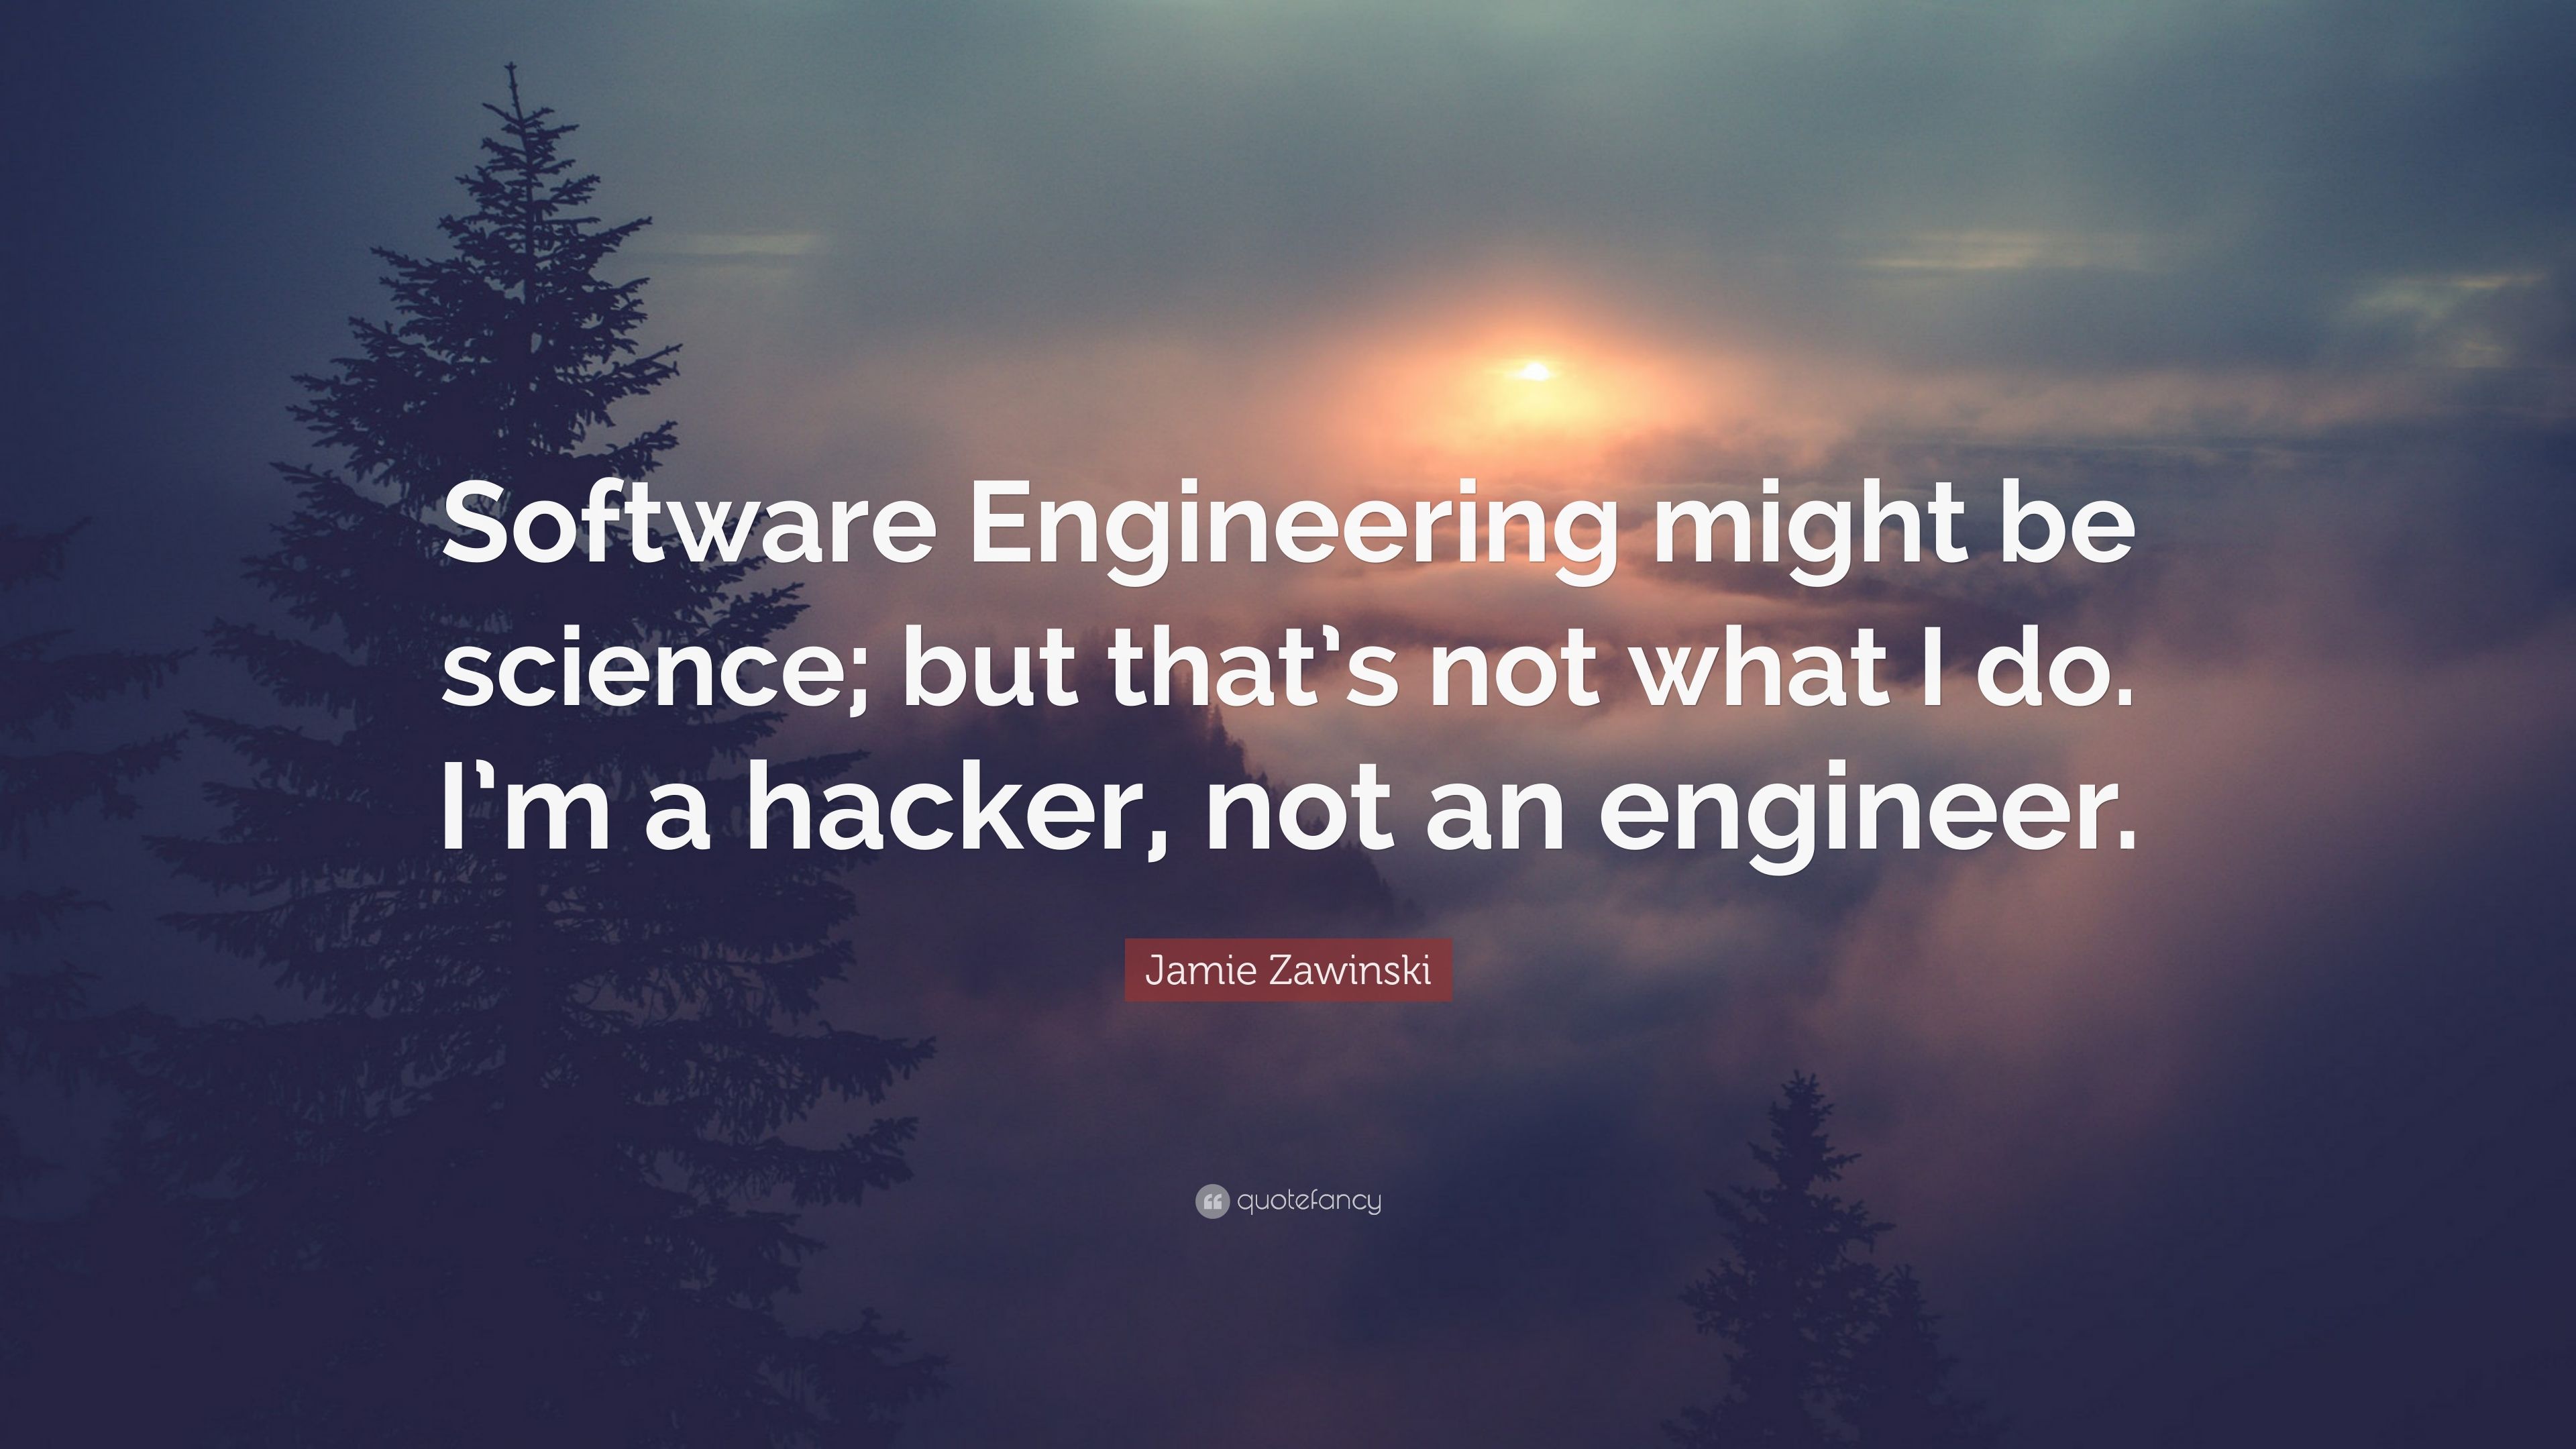 Jamie Zawinski Quote: “Software Engineering might be science; but